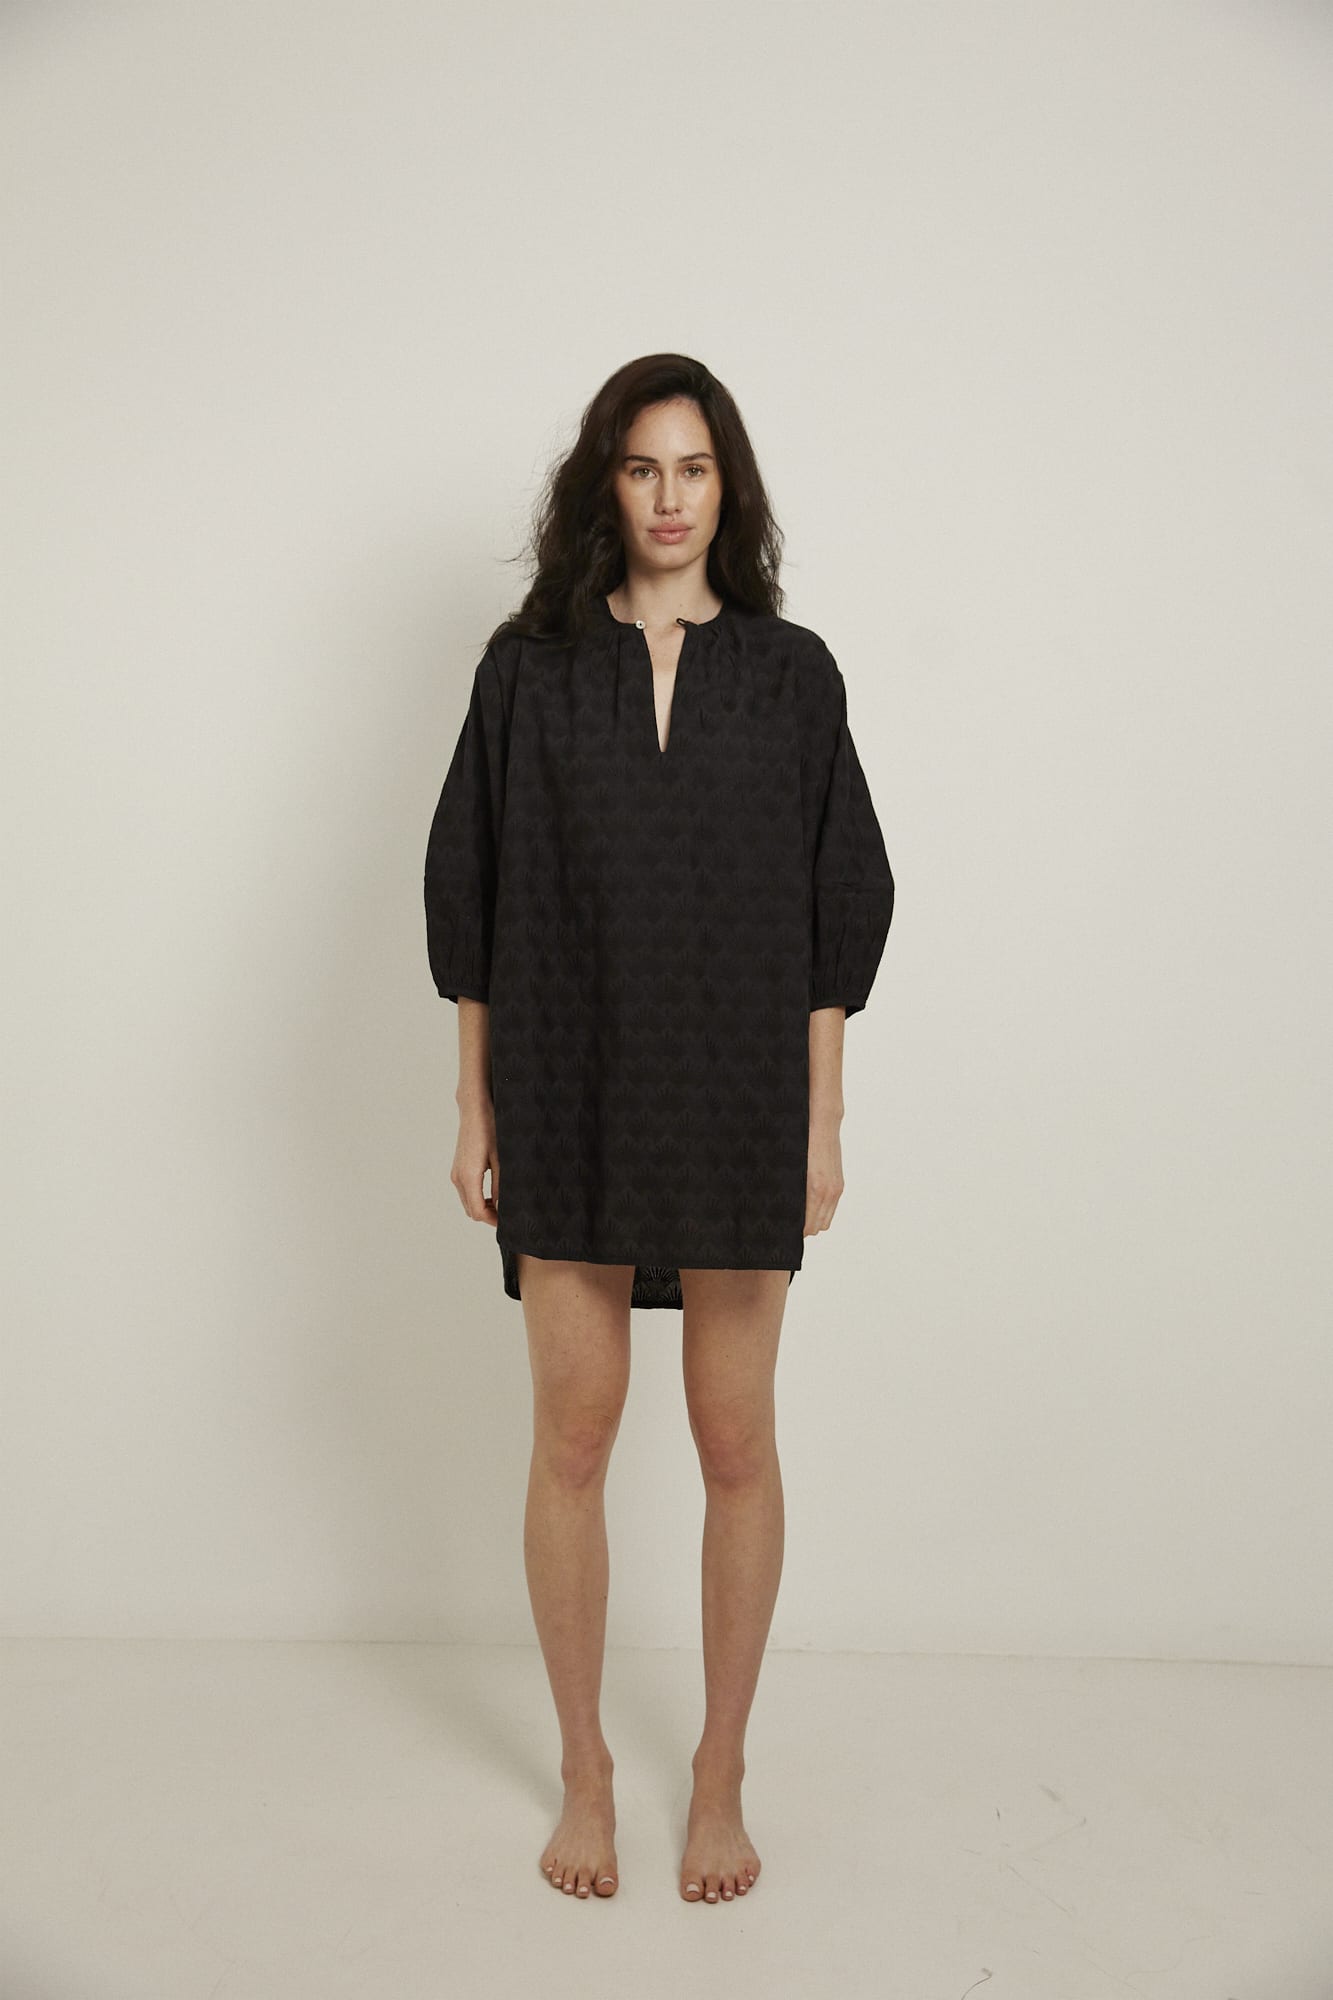 This knee length women’s nightdress dress has a relaxed fit with gathered sleeves ,and a single loop buttoned neckline which opens to a V-neck. In black and made from 100% organic cotton, it features delicate all over embroidery, deep pockets, and is finished with French seams.